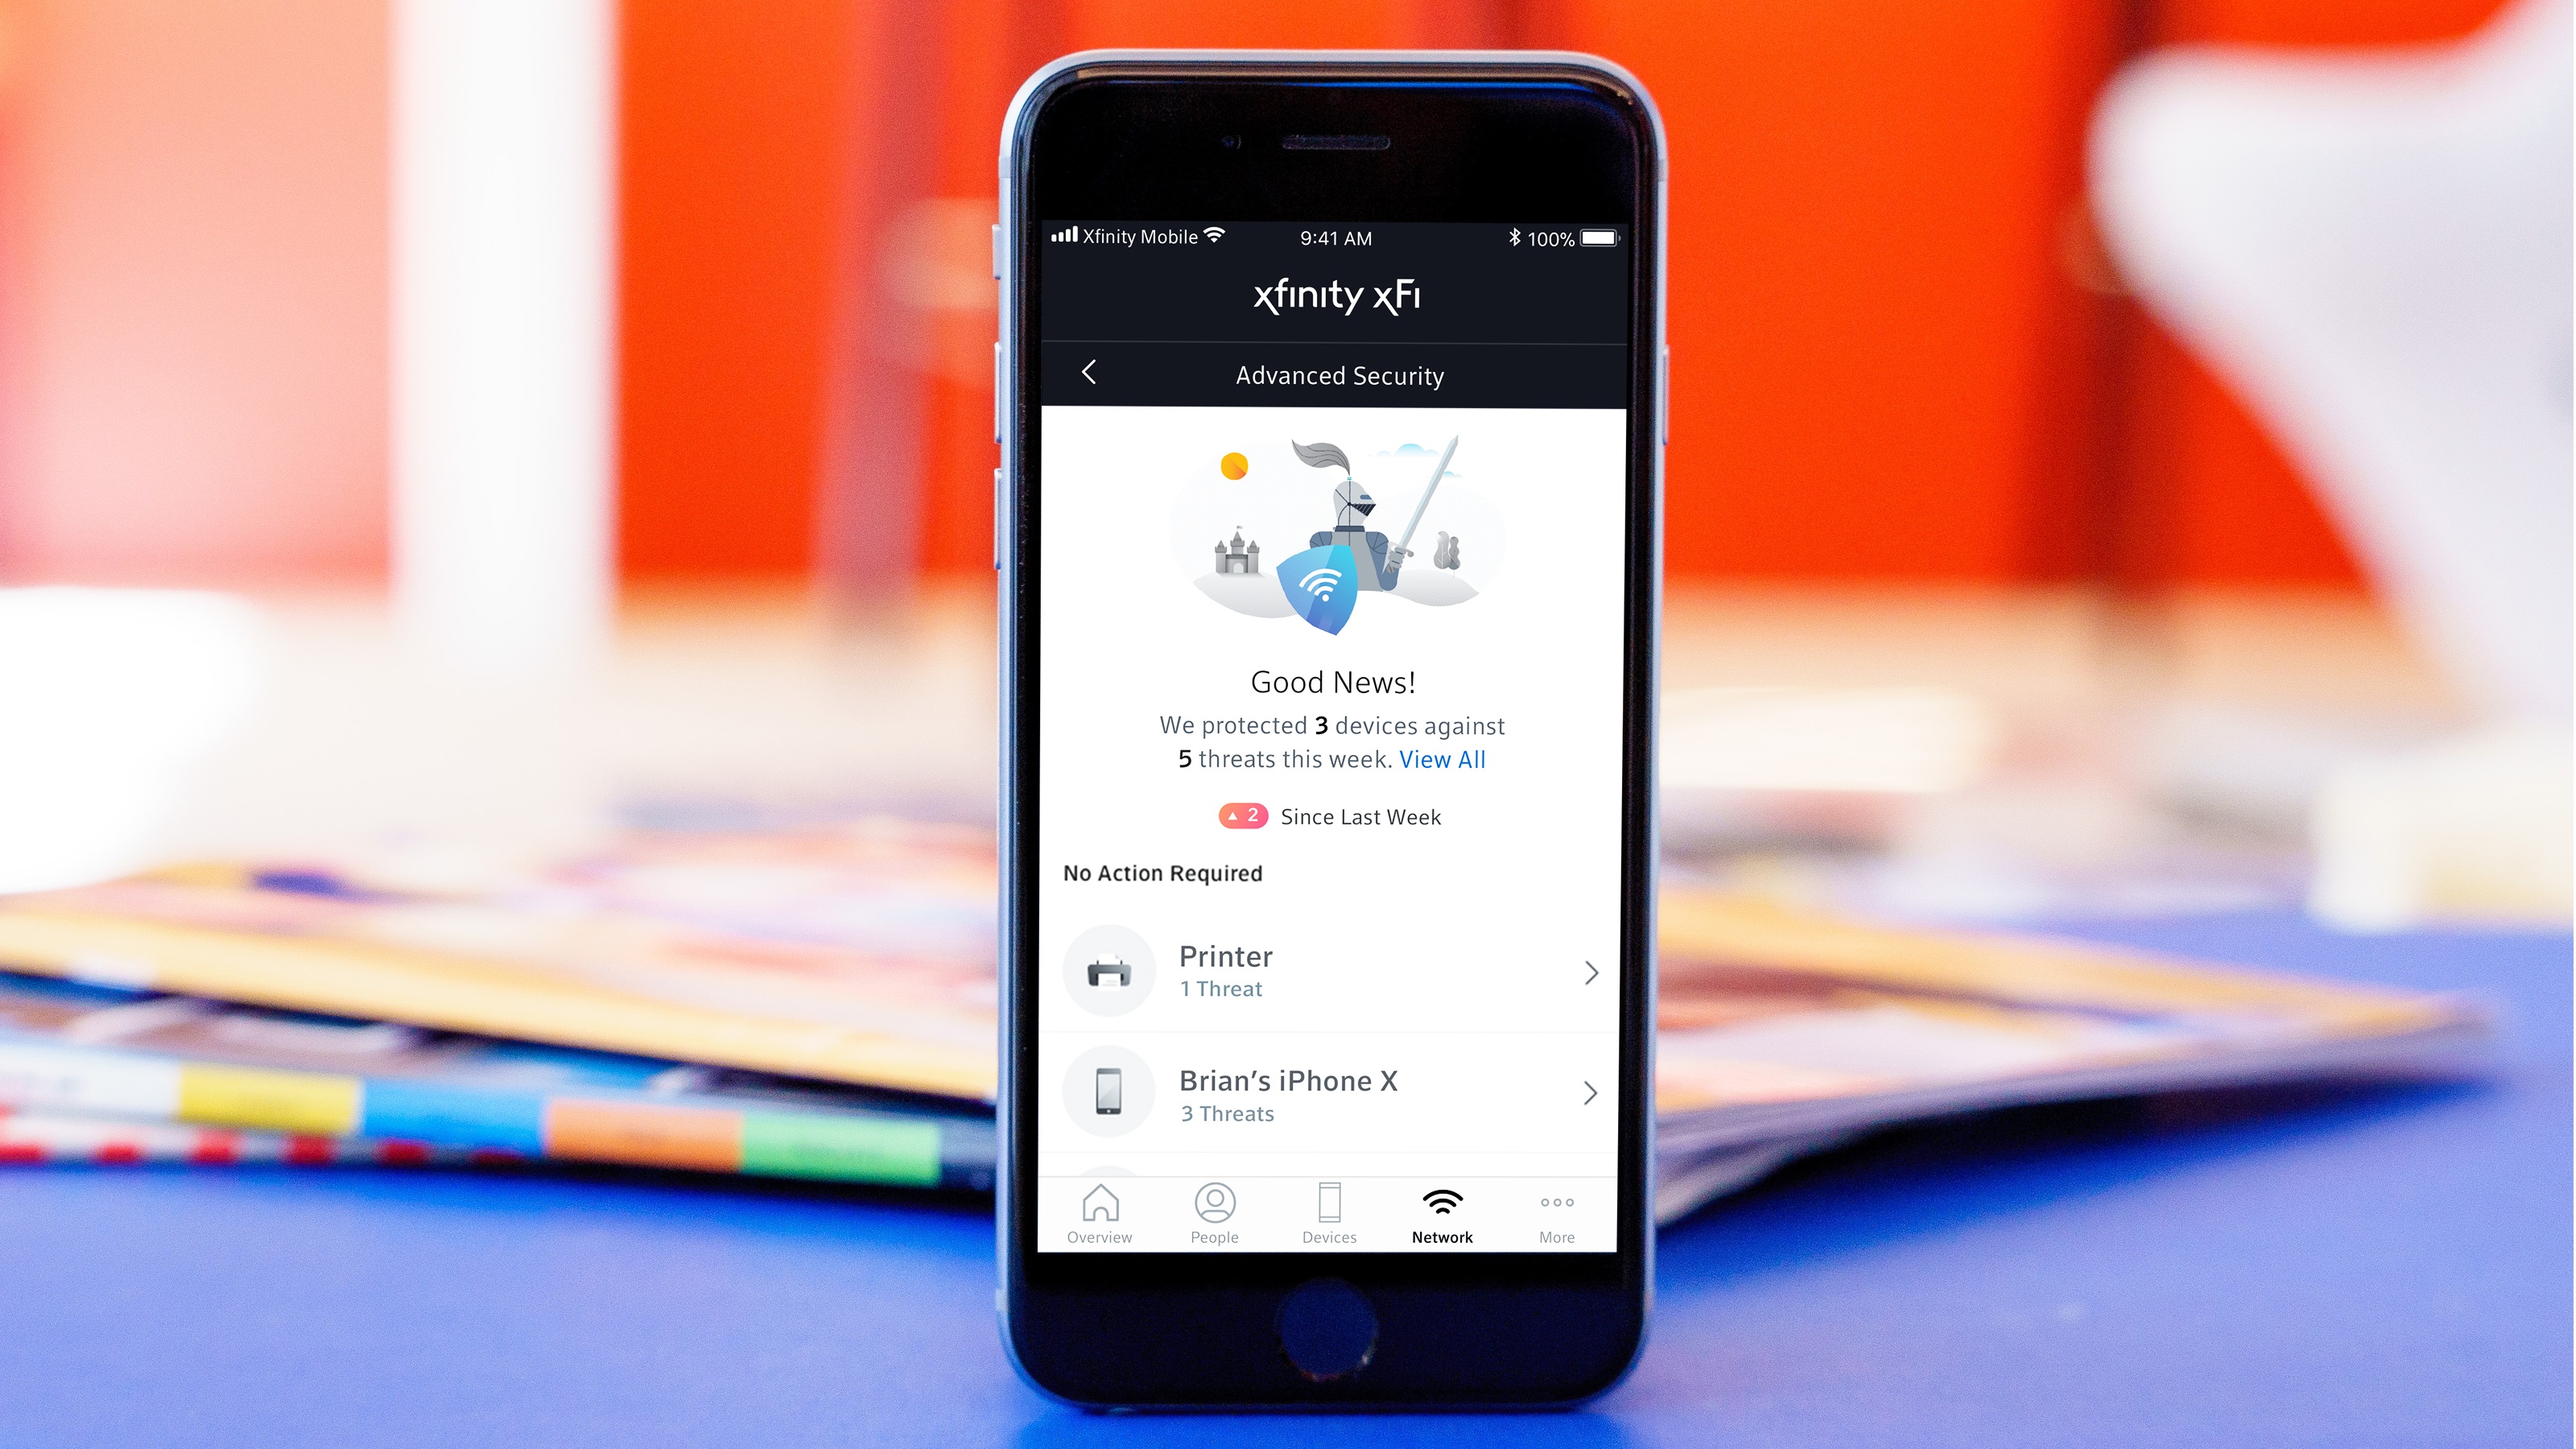 Comcast announced the national launch of Xfinity xFi Advanced Security, a n...